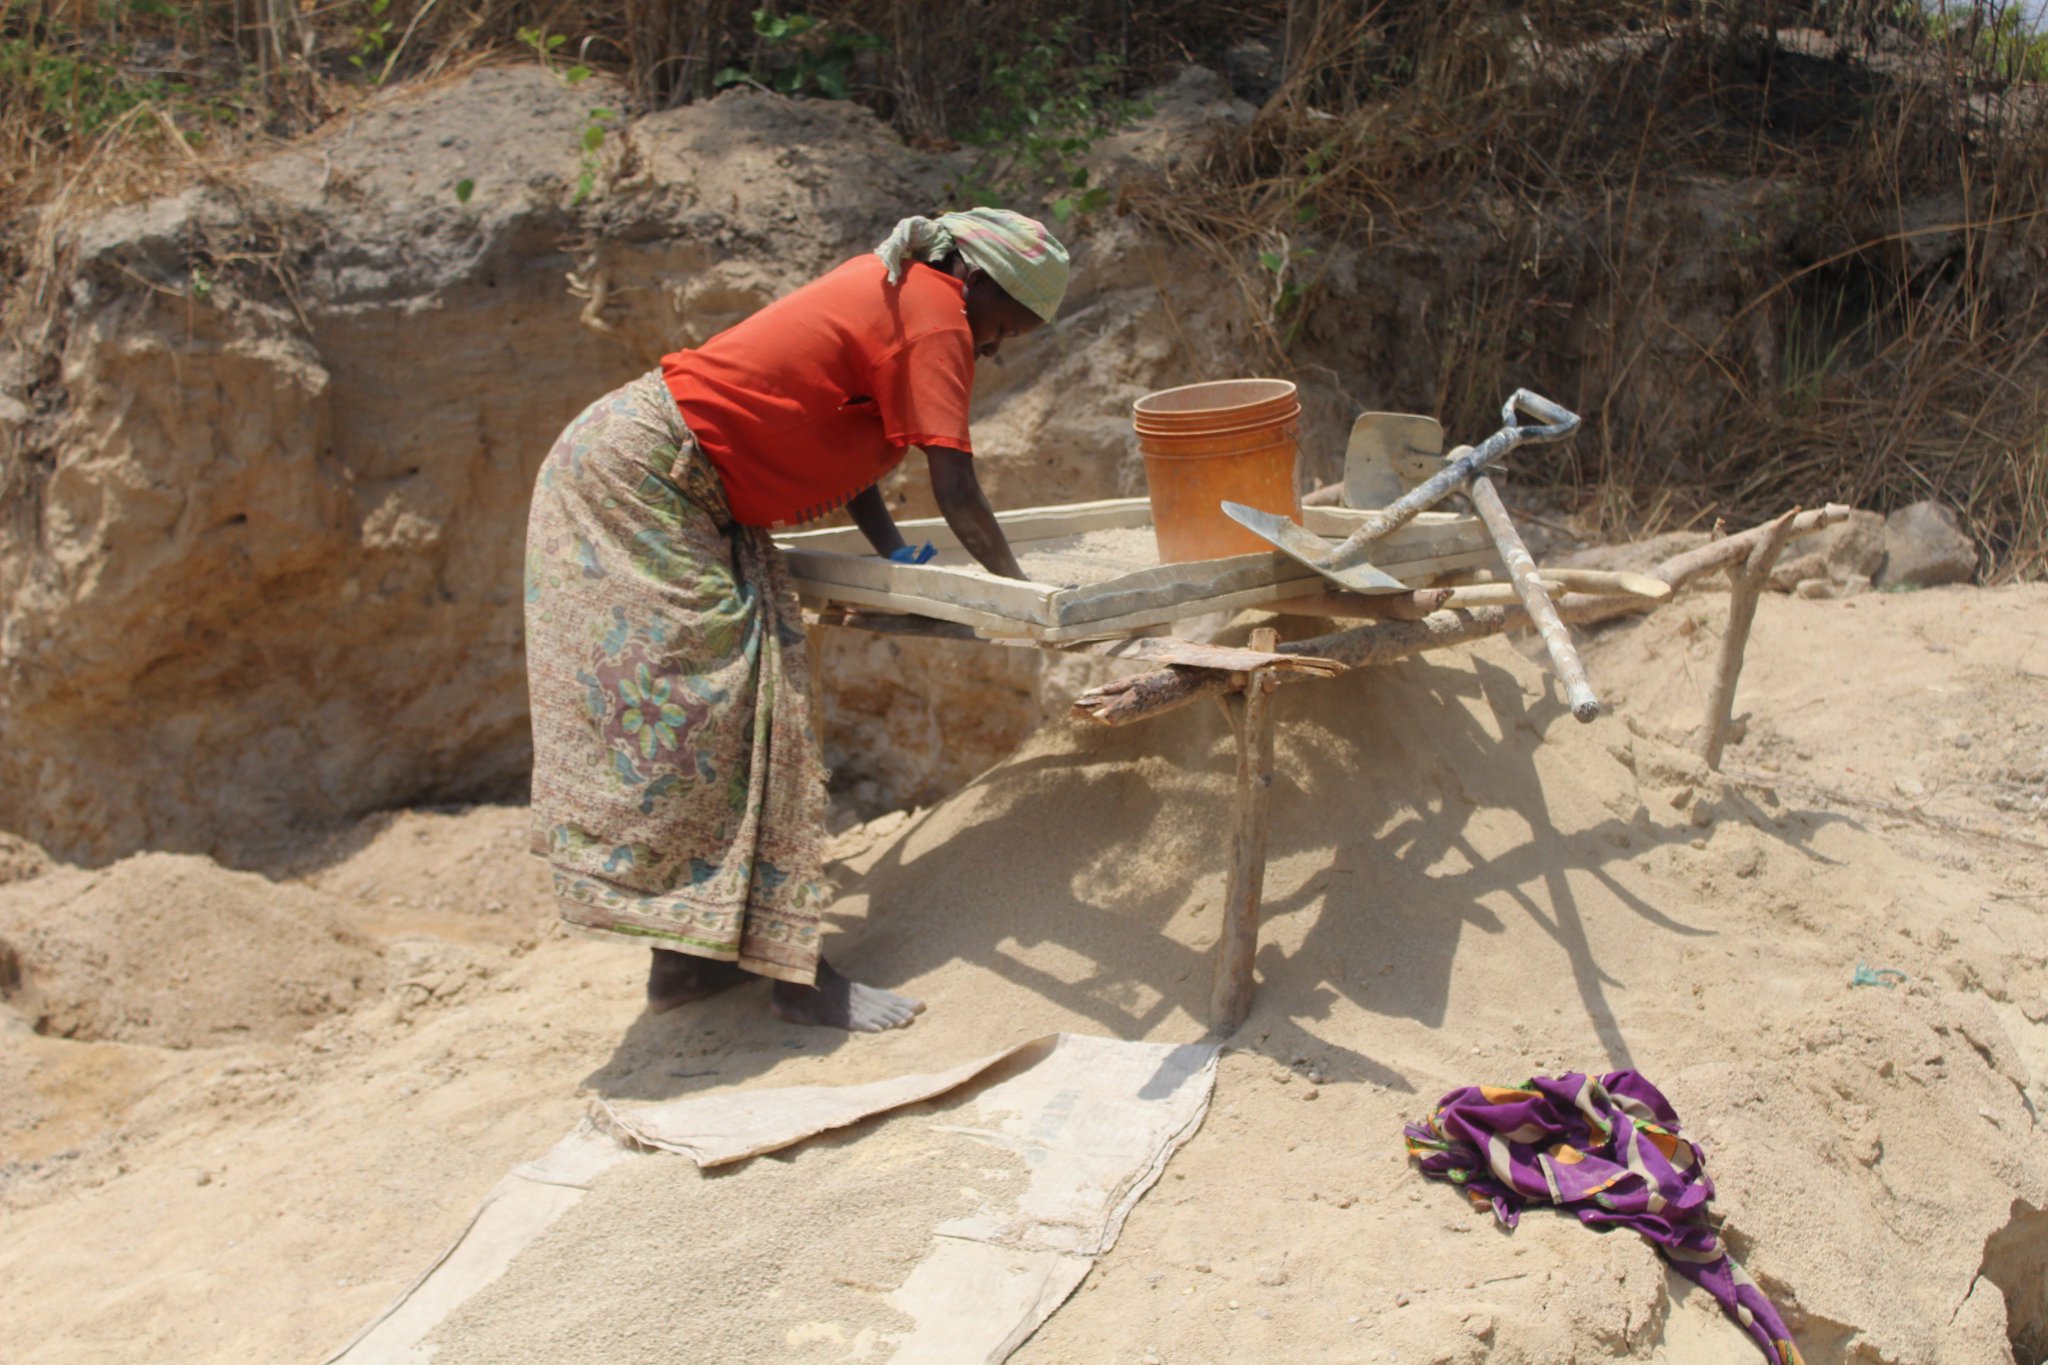 How can we put women @ the center of the #ASM sector? Here's the Development Minerals perspective https://t.co/VK85nEaKis #DevMin #shareASM https://t.co/YEcaZ4X1iW